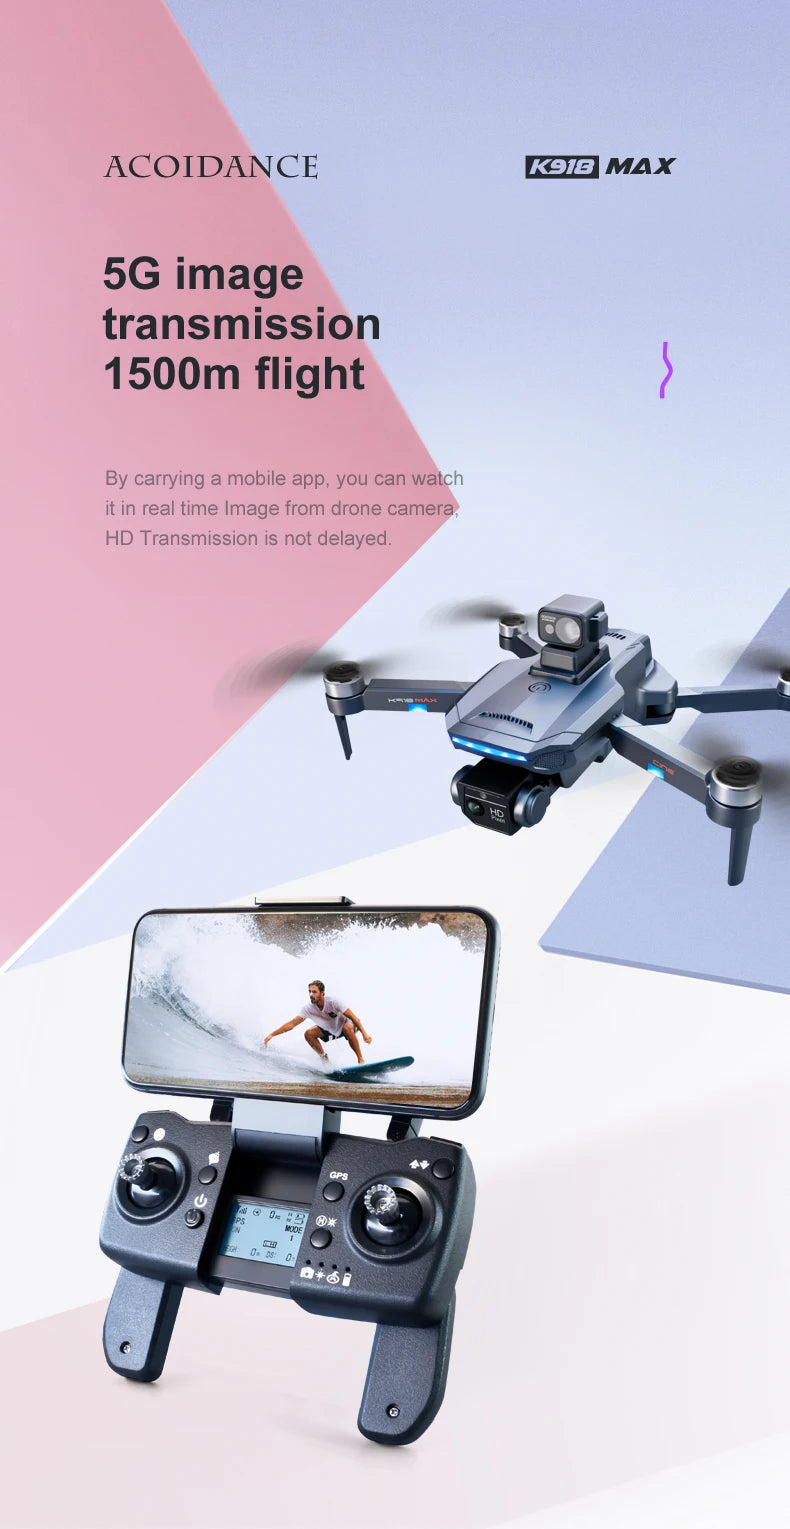 XYRC K918 MAX GPS Drone, mobile app allows you to watch drone in real time . transmission is not delayed: Q4